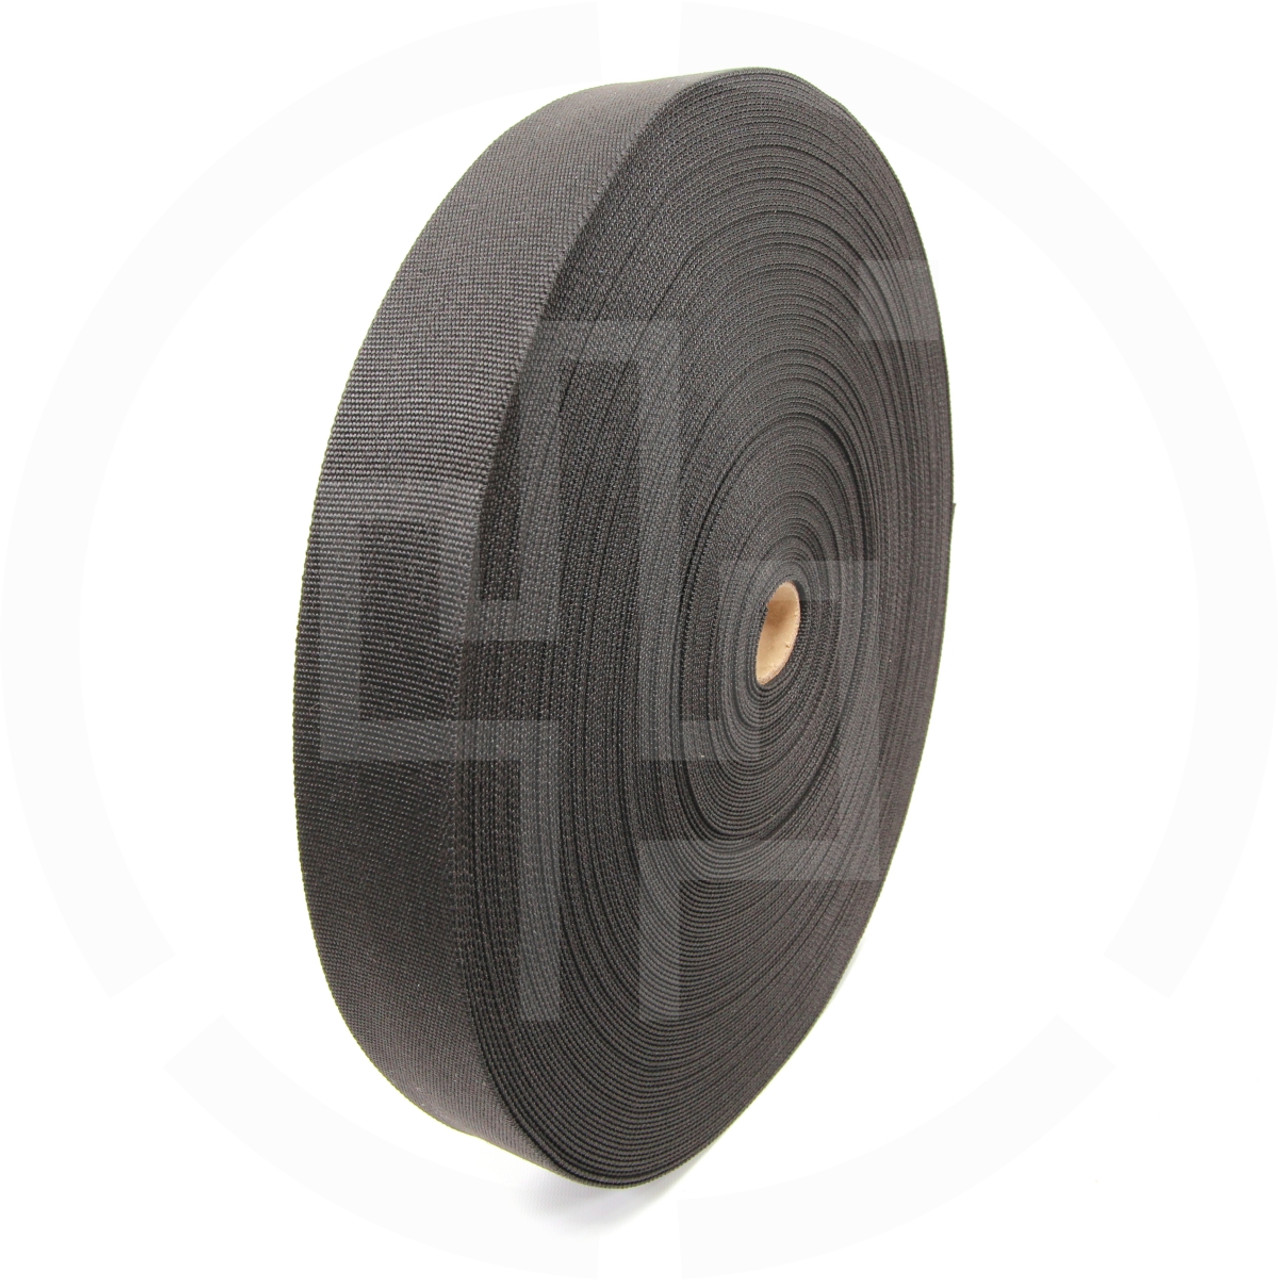 2 inch (50mm) tubular nylon webbing, Berry compliant, IRR compliant,  solution dyed black whiskey two four